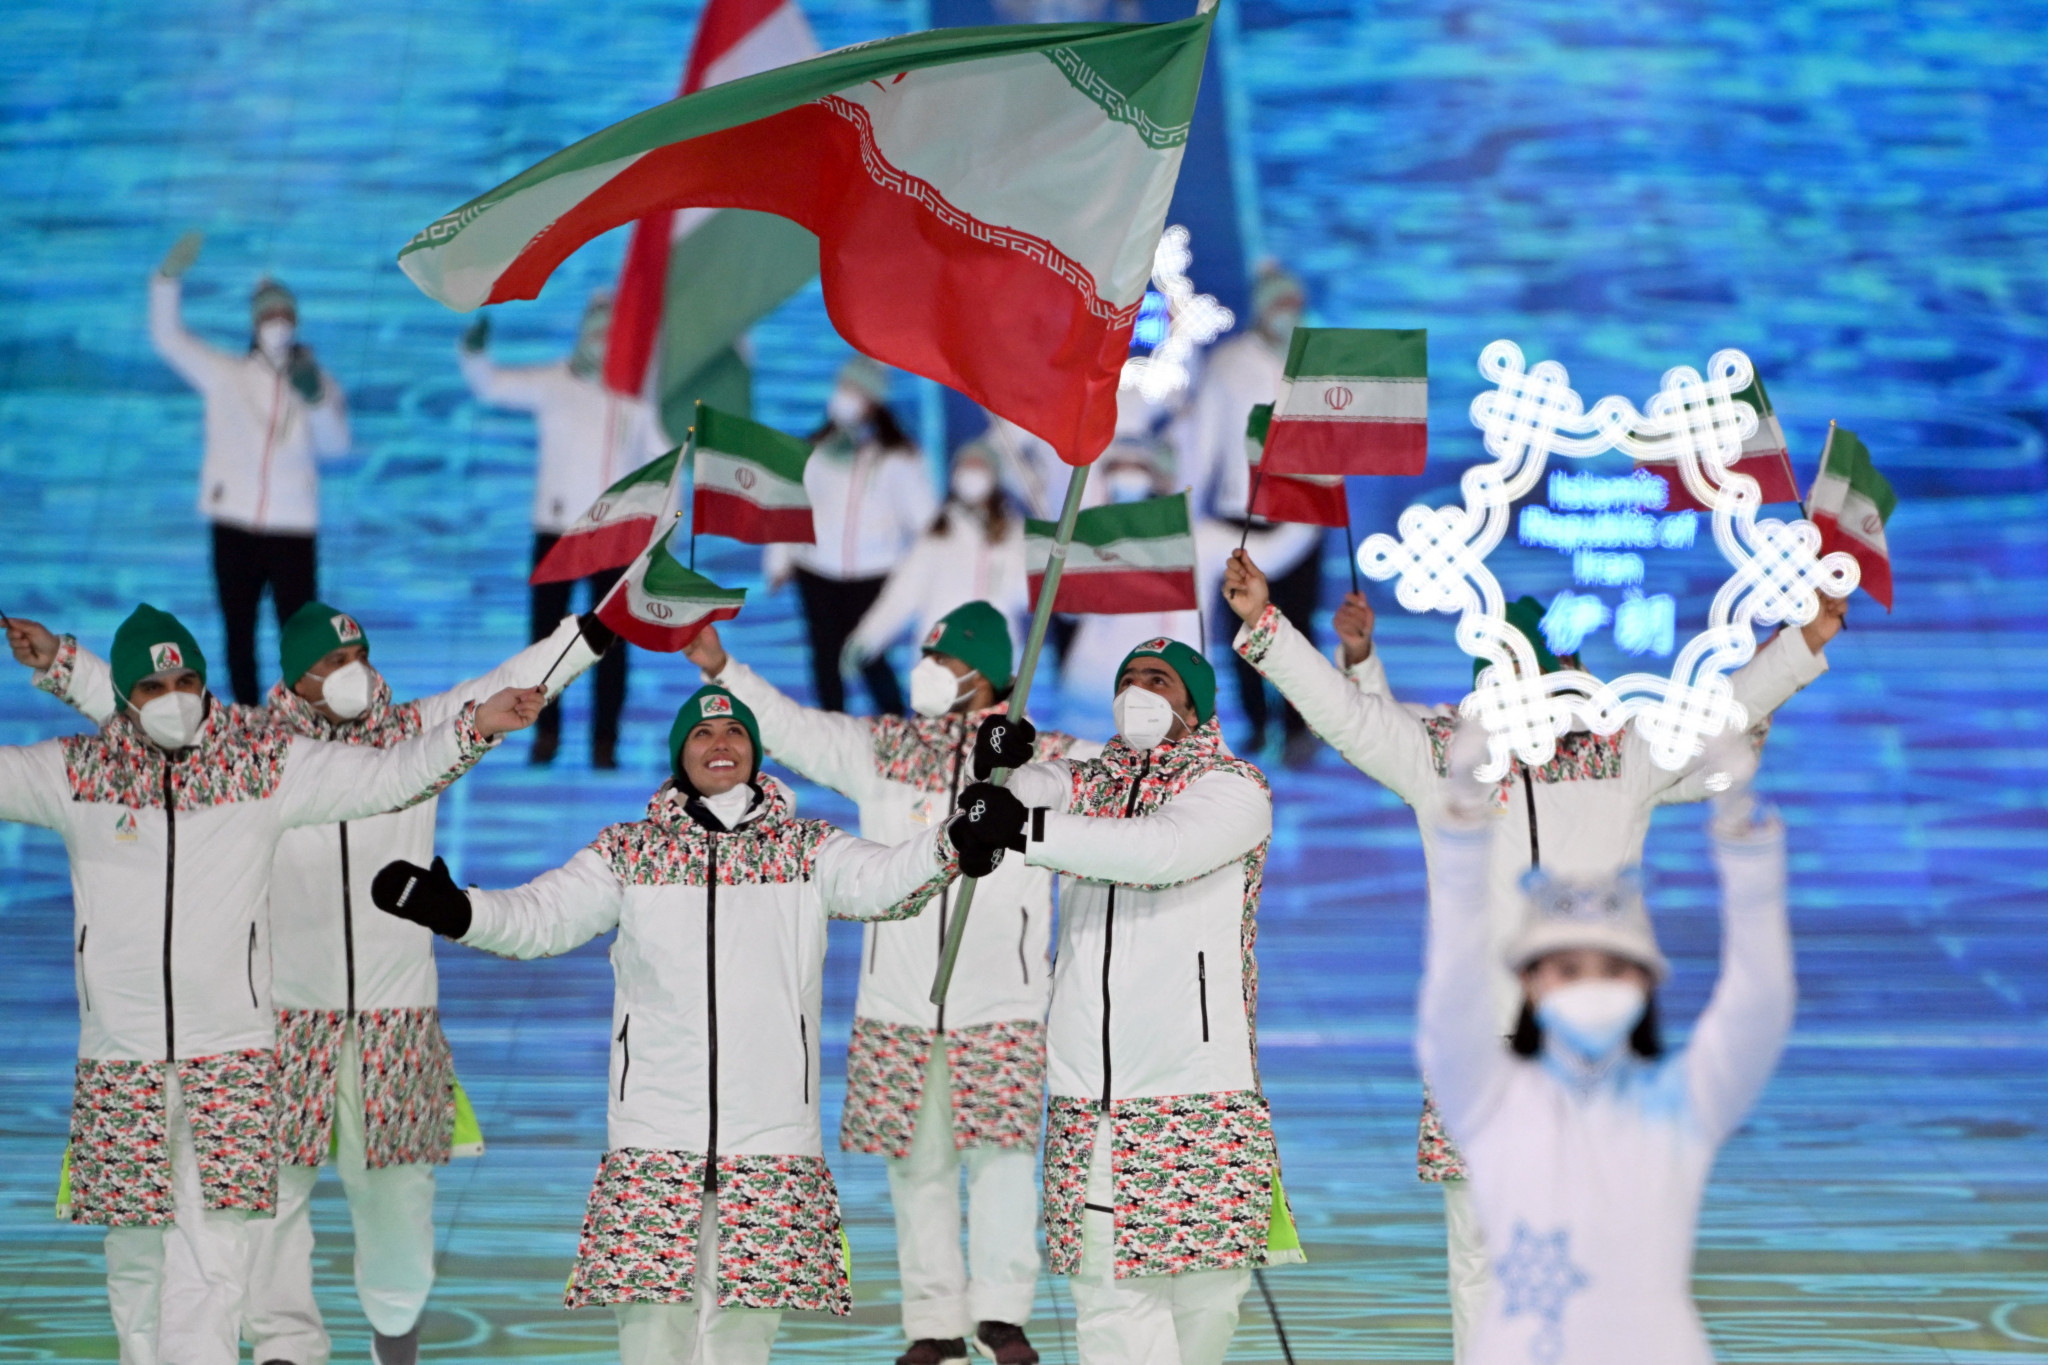 Hossein Saveh Shemshaki, right, carried the Iranian flag along with Atefeh Ahmadi at the Opening Ceremony in Beijing ©Getty Images